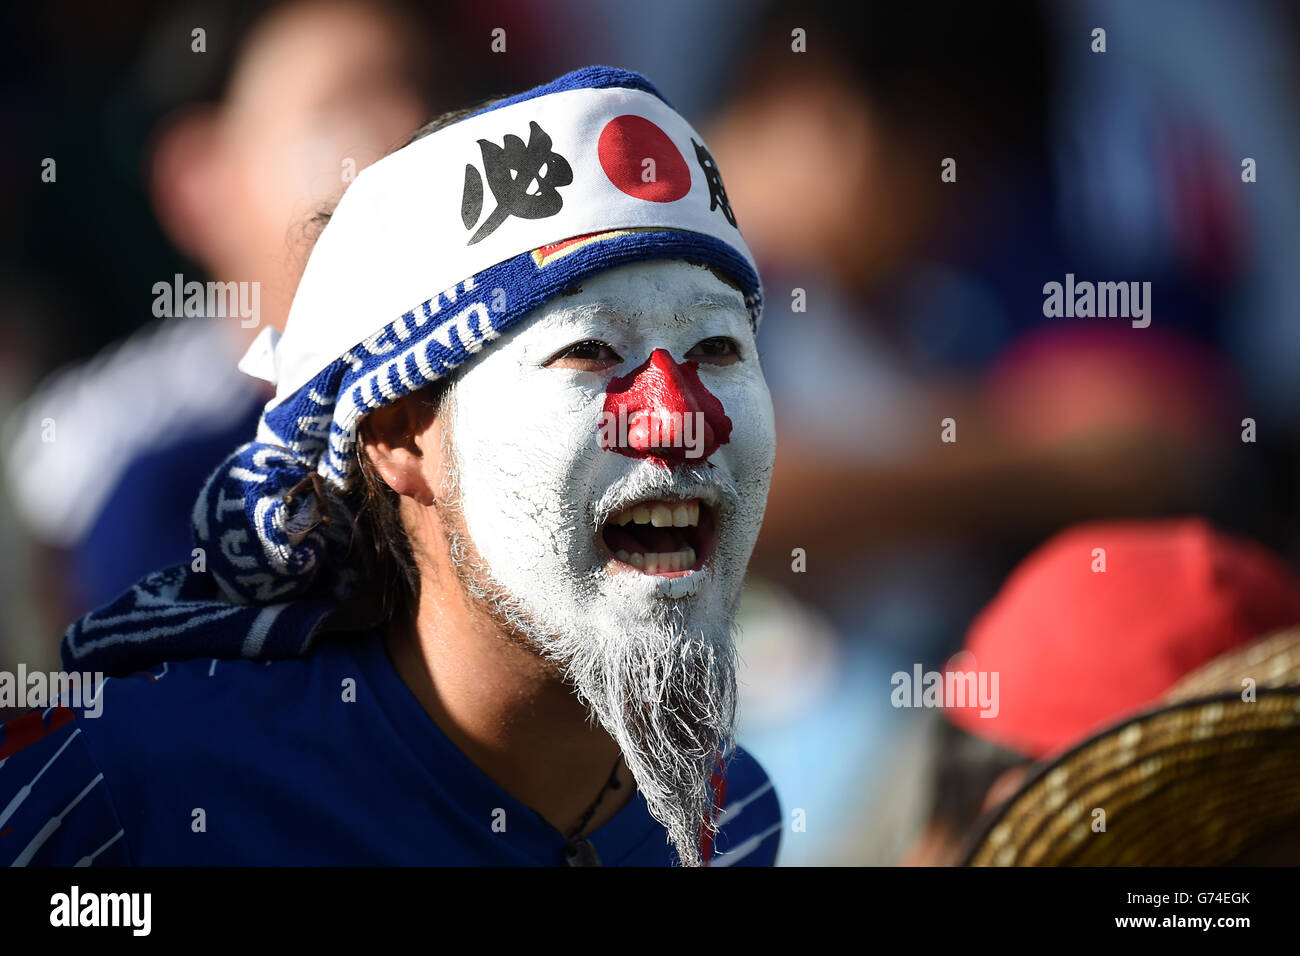 Soccer - FIFA World Cup 2014 - Group C - Japan v Colombia - Arena Pantanal. Japan fans in the stands. Stock Photo